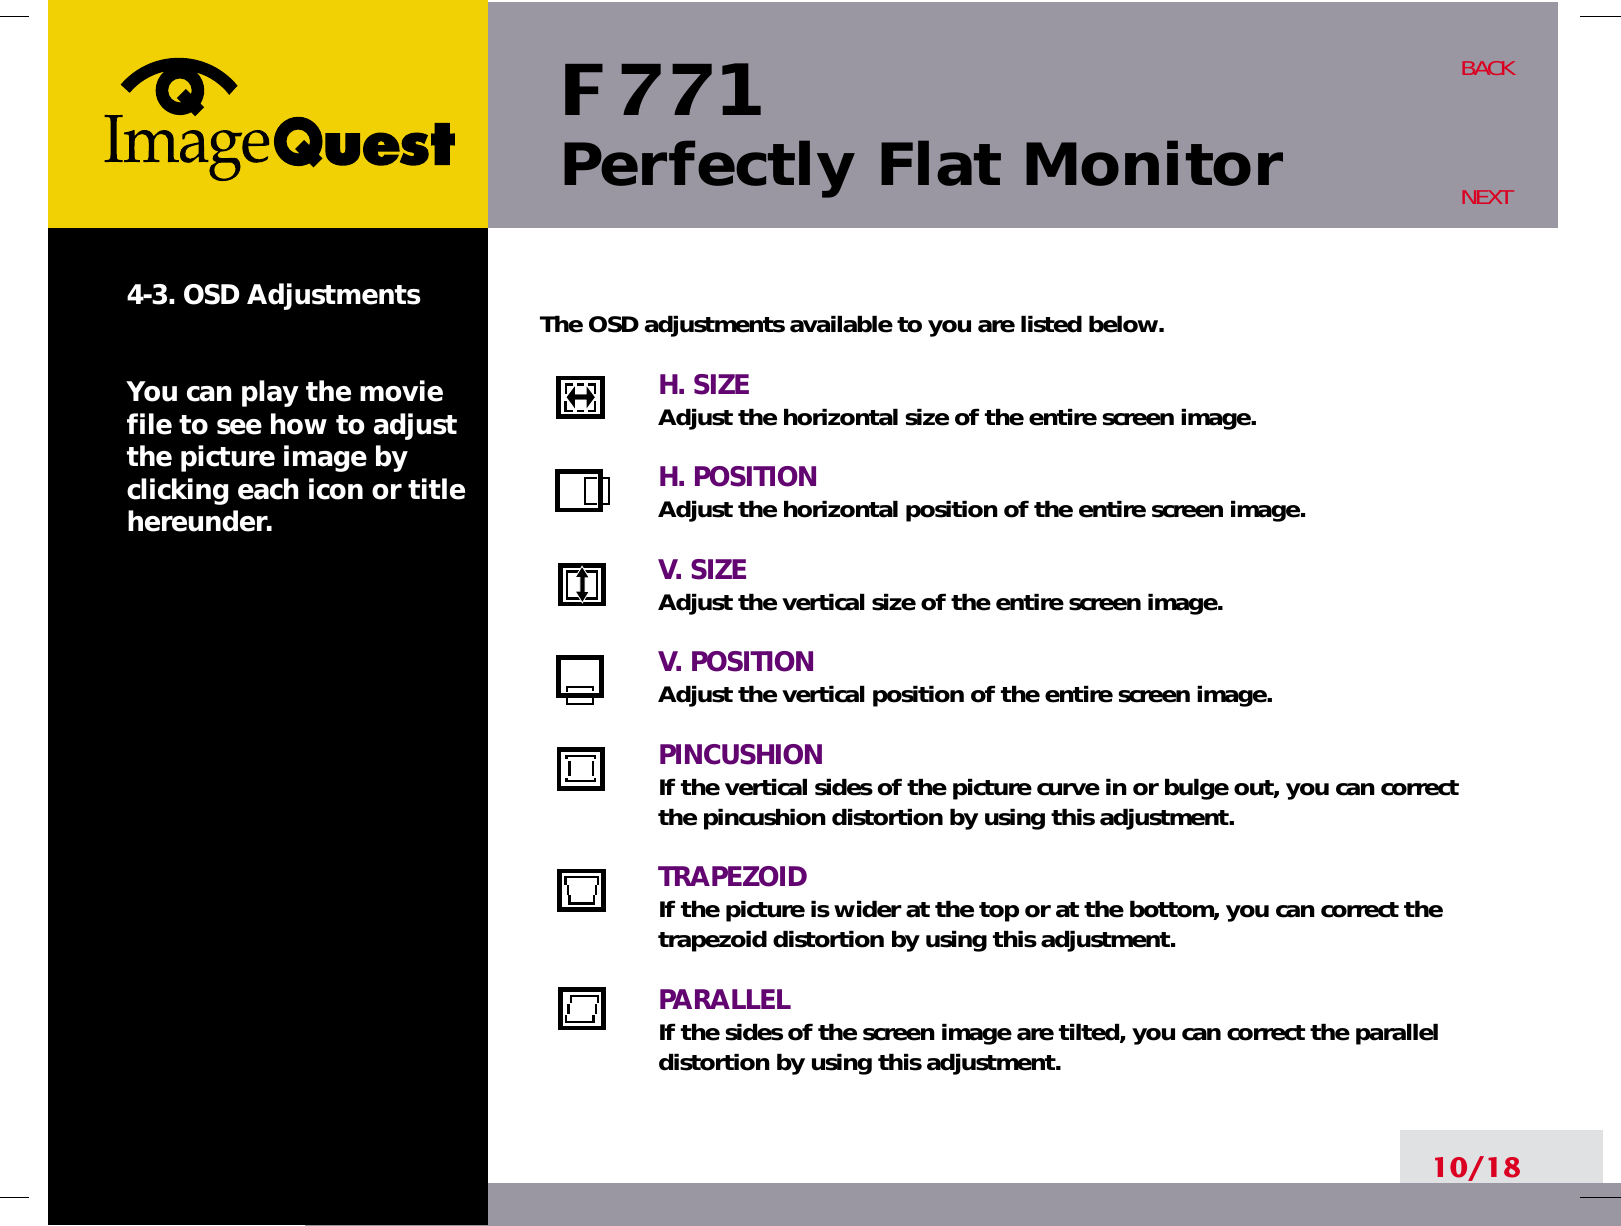 F 771Perfectly Flat Monitor10/18BACKNEXT4-3. OSD AdjustmentsYou can play the moviefile to see how to adjustthe picture image byclicking each icon or titlehereunder.The OSD adjustments available to you are listed below.H. SIZEAdjust the horizontal size of the entire screen image.H. POSITIONAdjust the horizontal position of the entire screen image.V. SIZEAdjust the vertical size of the entire screen image.V. POSITIONAdjust the vertical position of the entire screen image.PINCUSHIONIf the vertical sides of the picture curve in or bulge out, you can correctthe pincushion distortion by using this adjustment.TRAPEZOIDIf the picture is wider at the top or at the bottom, you can correct thetrapezoid distortion by using this adjustment.PARALLELIf the sides of the screen image are tilted, you can correct the paralleldistortion by using this adjustment.